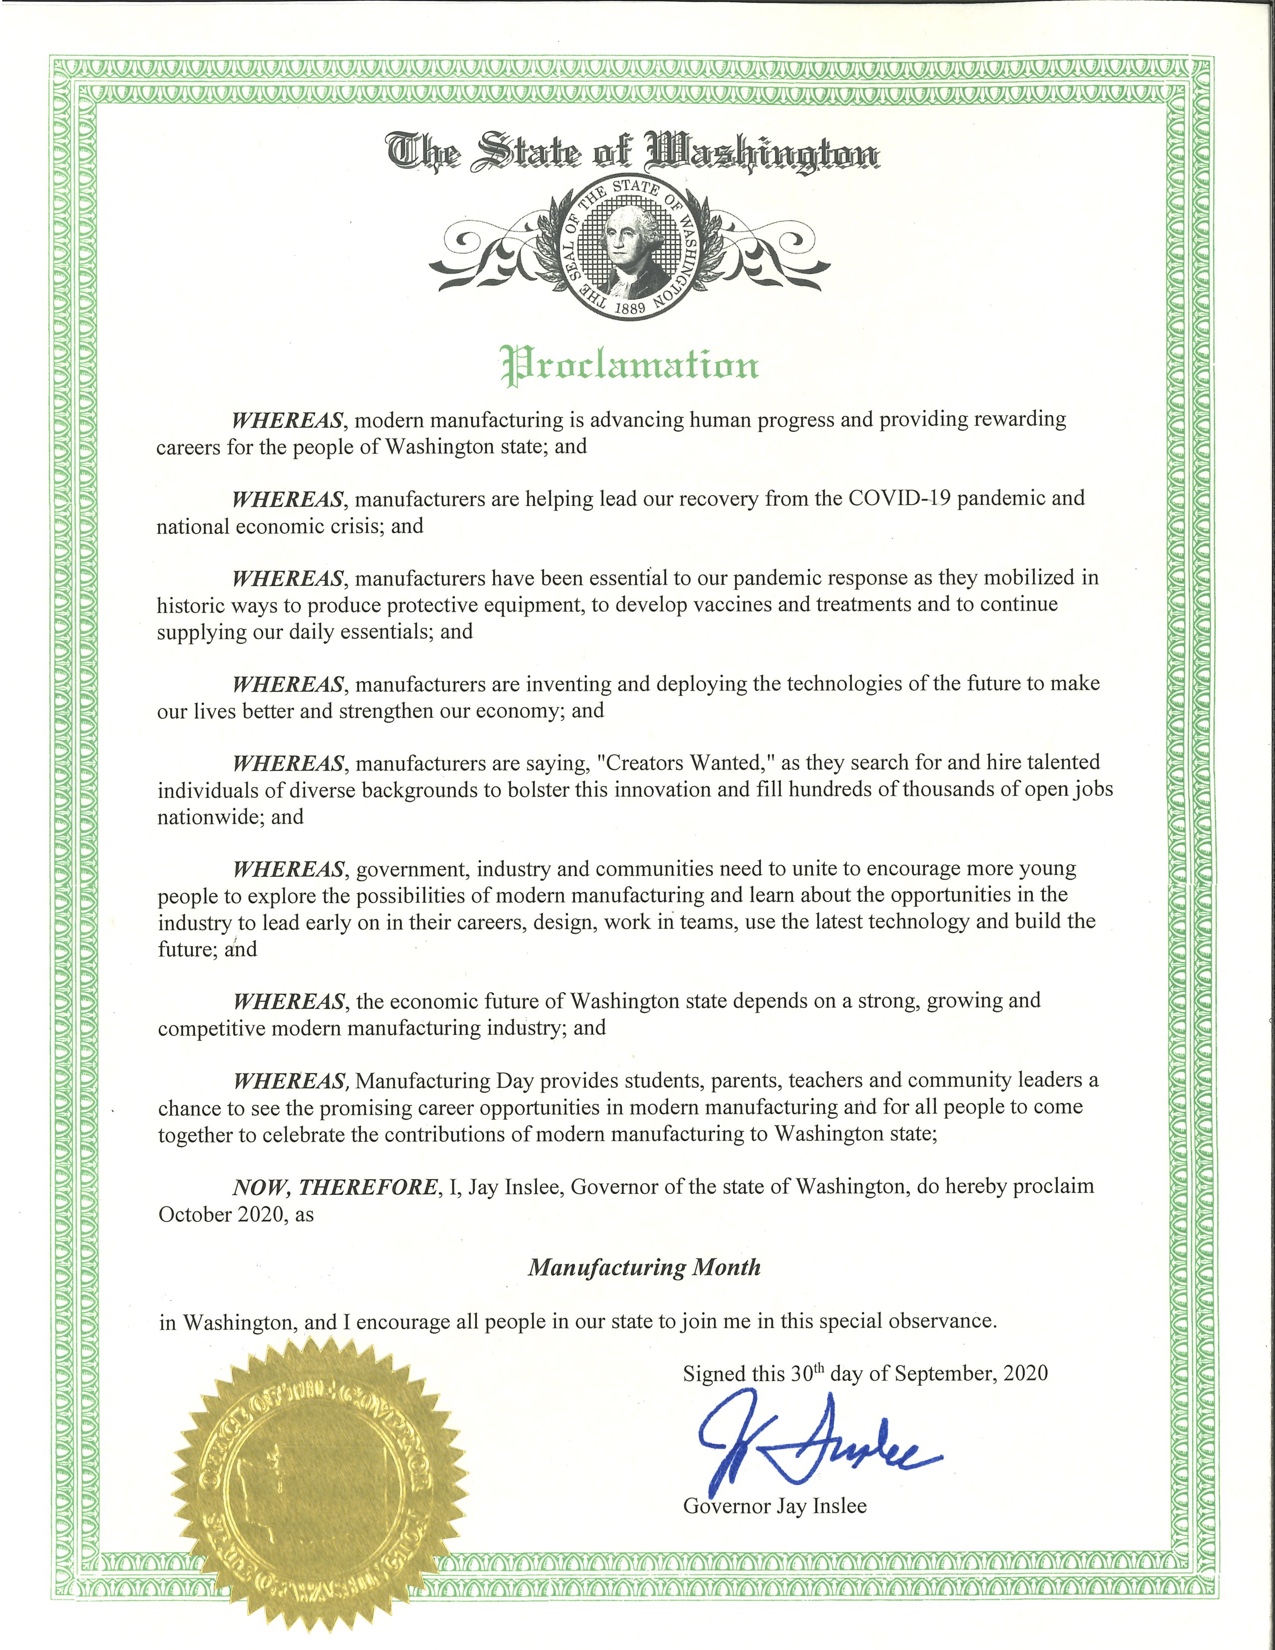 Official Washington State Proclamation of Manufacturing Month